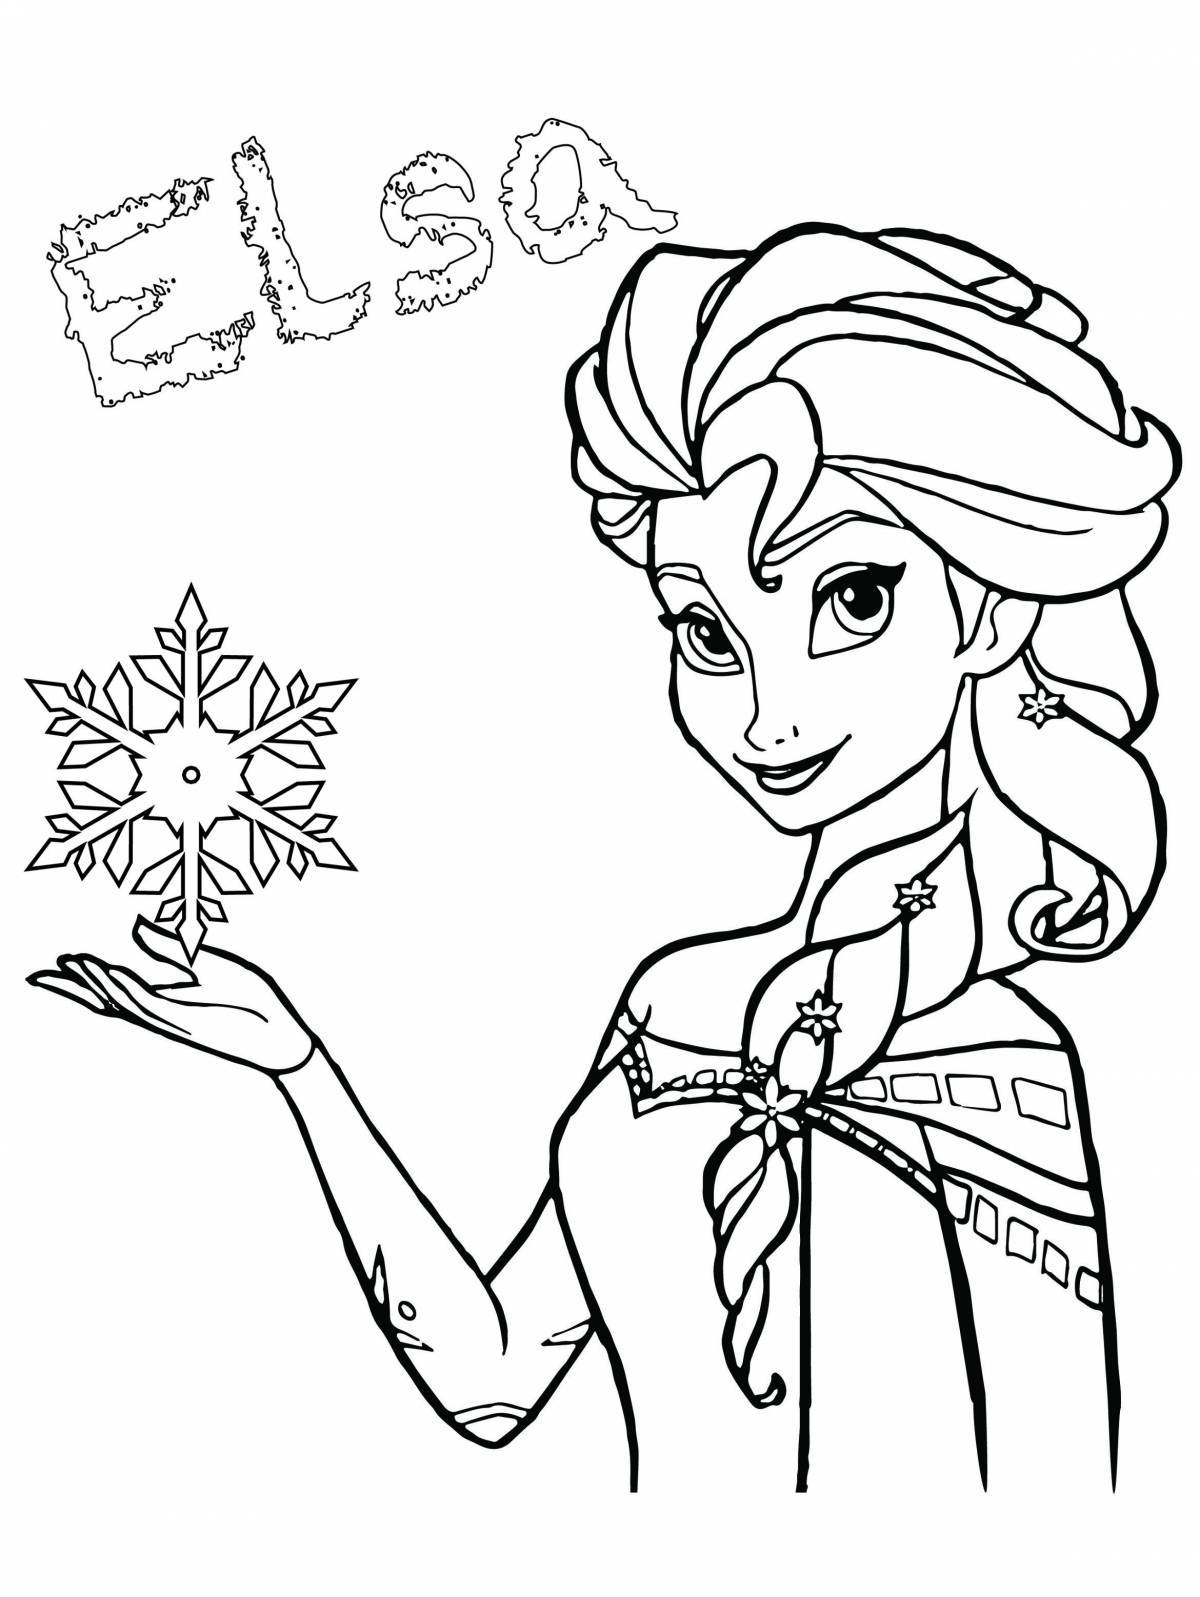 Exalted elsa coloring book for kids